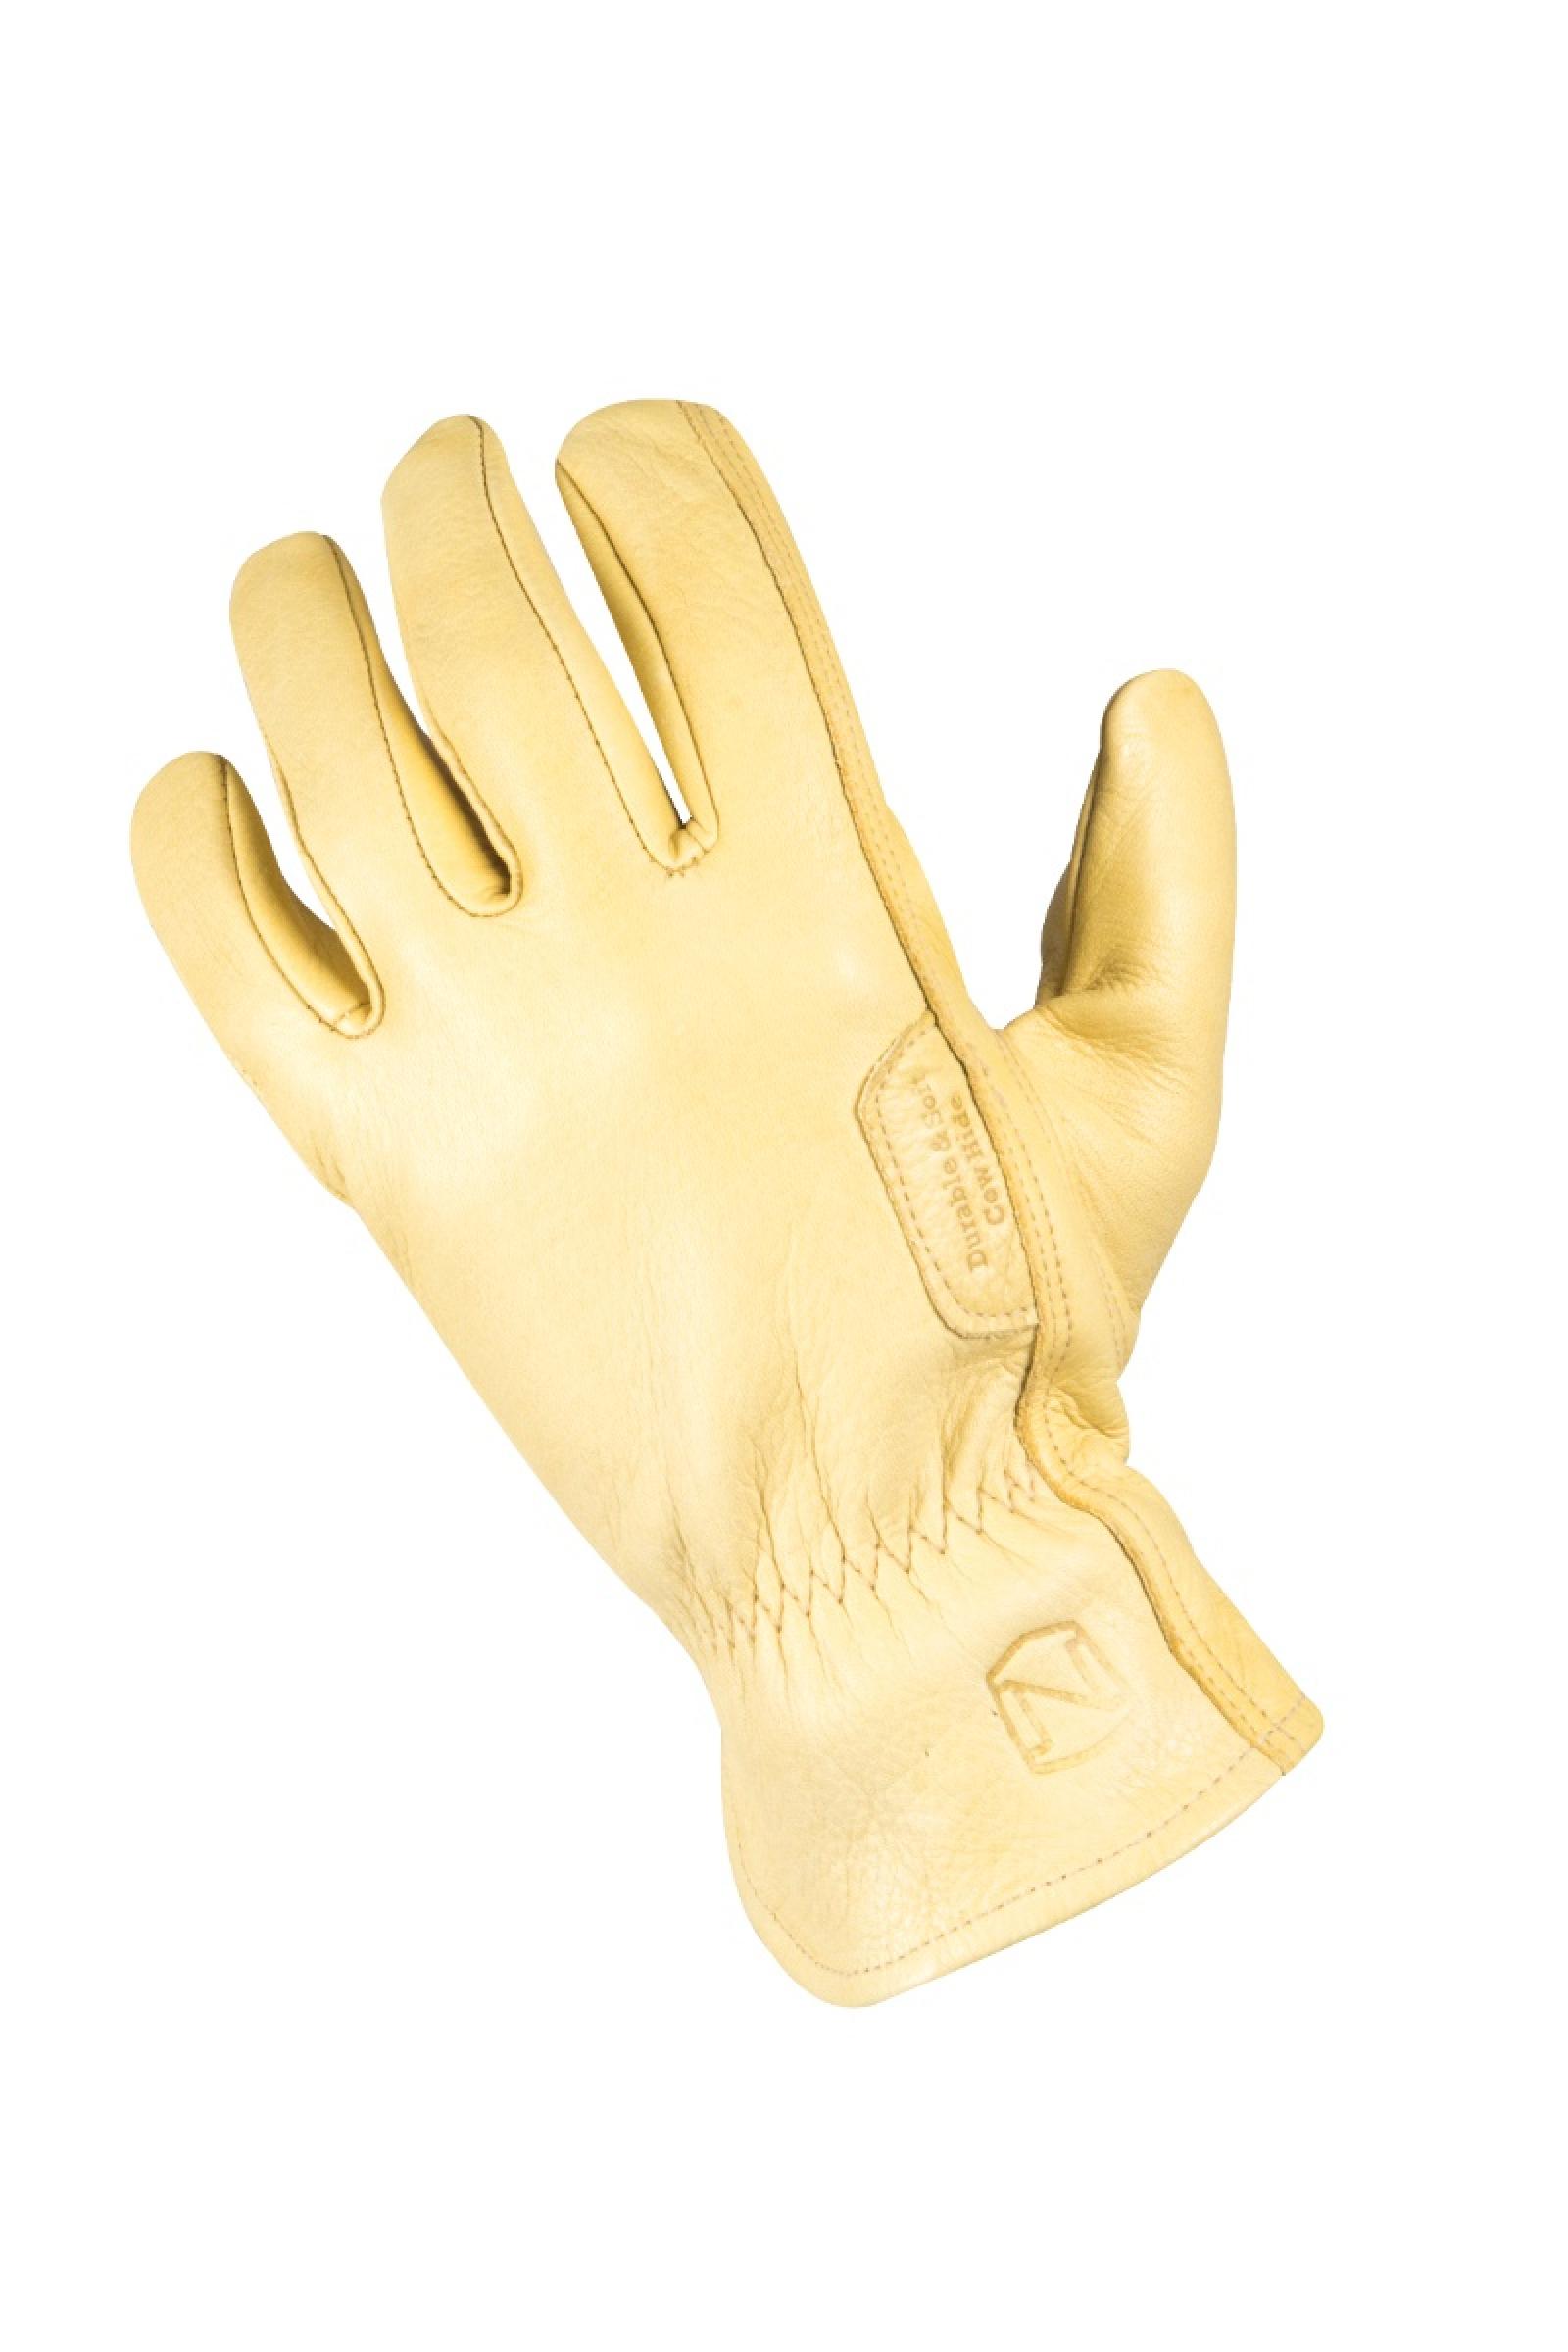 Noble Outfitters Cowhide Leather Work Glove